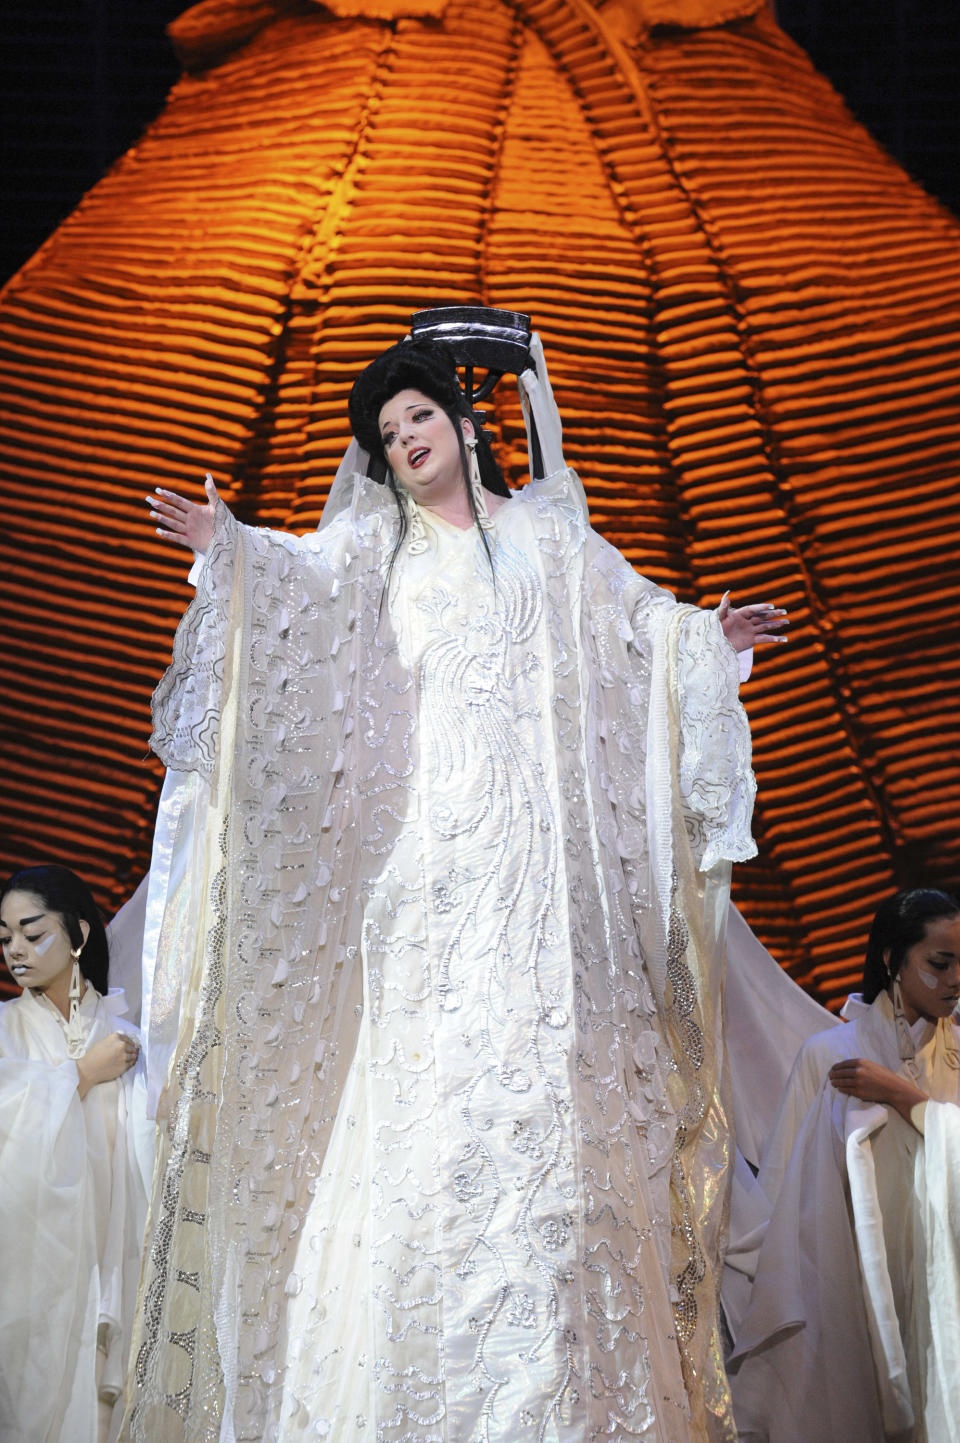 In this Jan. 14, 2012 photo provided by Opera Australia, a scene from an Opera Australia production of "Turandot" is played out at the Sydney Opera House in Sydney, Australia. Opera Australia's revival of Puccini's "Turandot" represents a triumph of the traditional, taking a fairy tale of ancient China on its own terms and bringing it to life through dazzling stagecraft. (AP Photo/Opera Australia, Branco Gaica) EDITORIAL USE ONLY